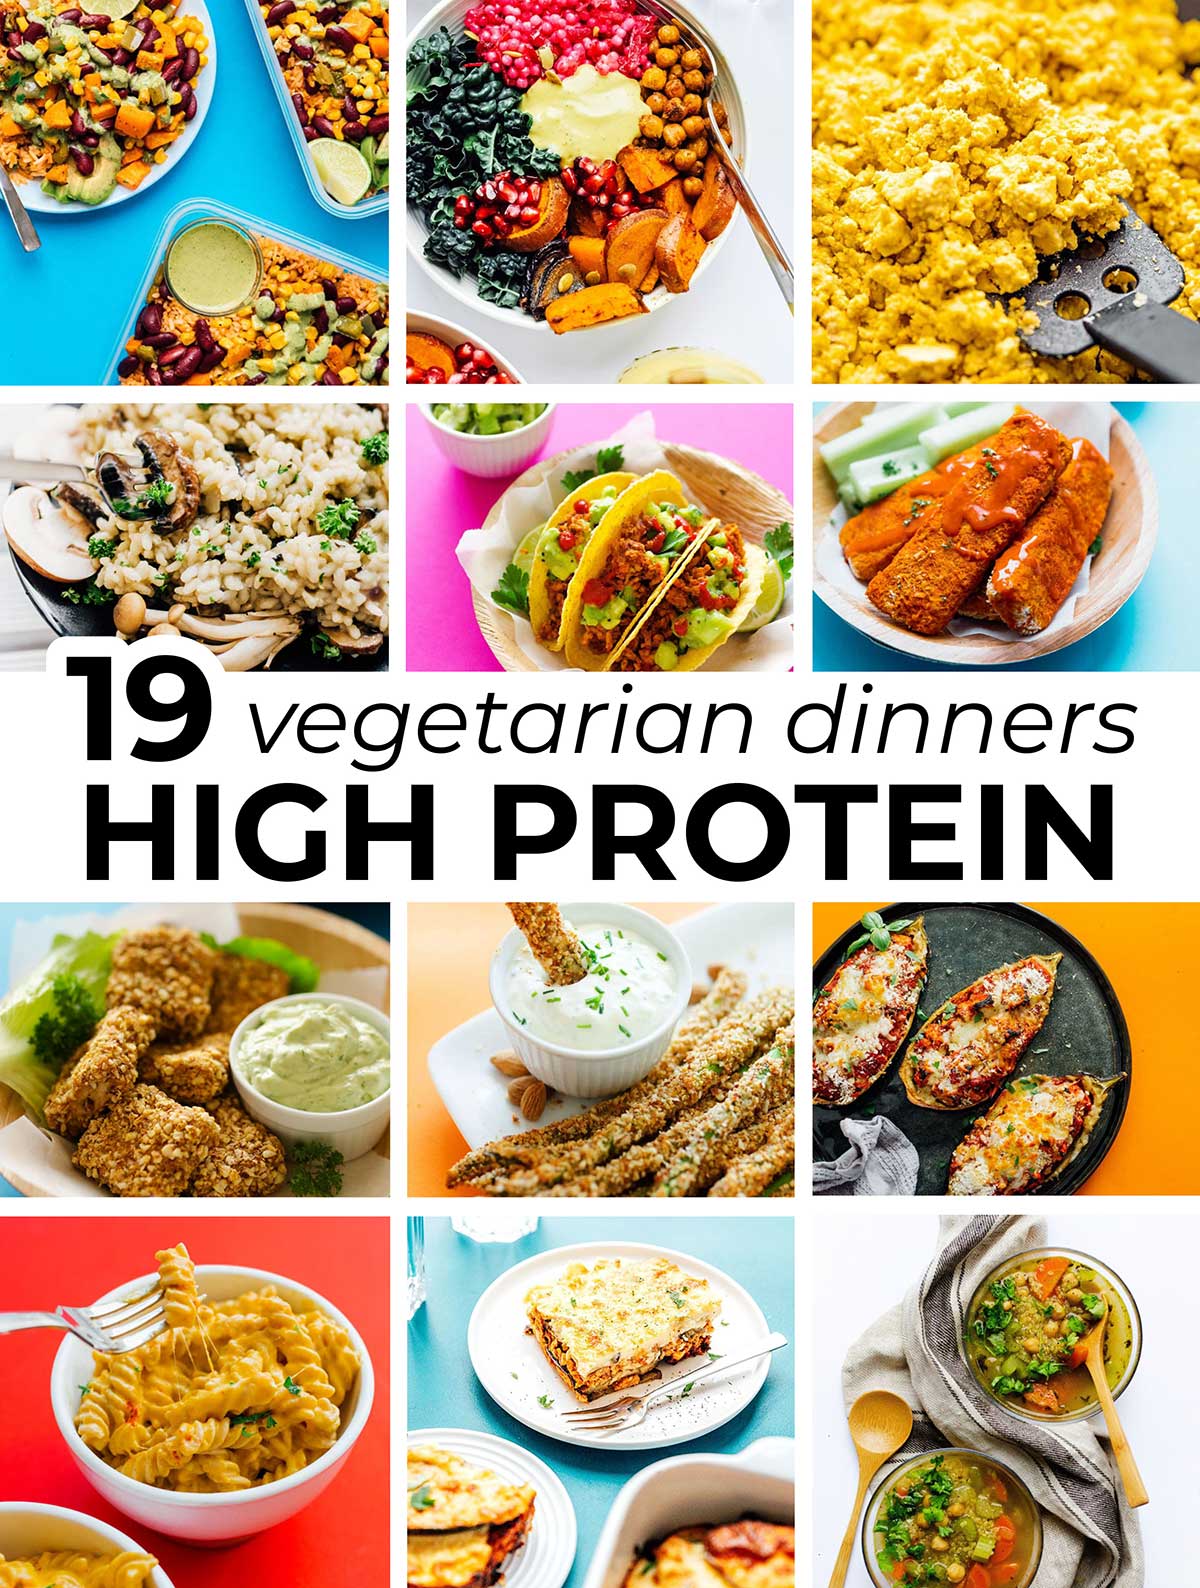 19 High Protein Vegetarian Meals You'll Drool Over | Live Eat Learn